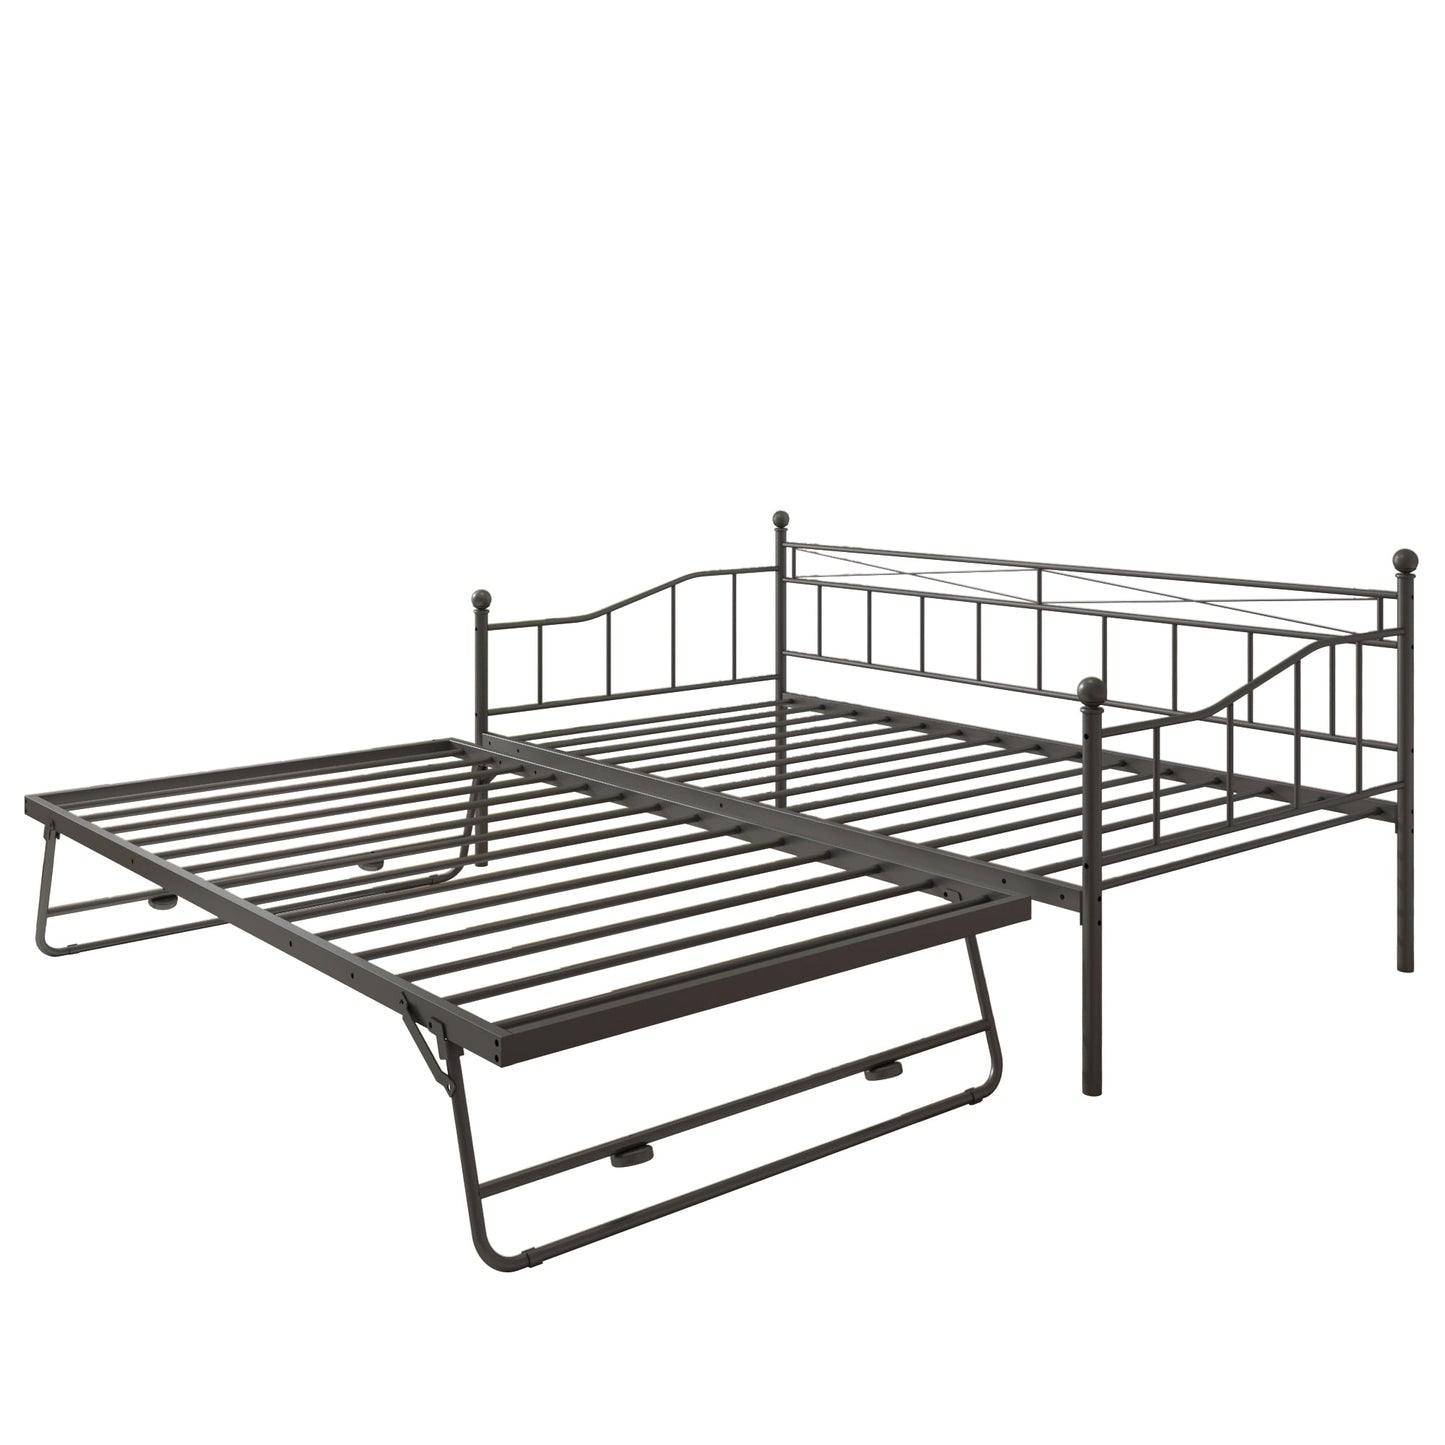 Twin Daybed with Pop Up Trundle, Metal Twin Size Daybed Frame, Space Saving Sofa Bed with Trundle Bed, Modern Home Platform Bed for Living Room/Bedroom, No Box Spring Needed, Black, D6607